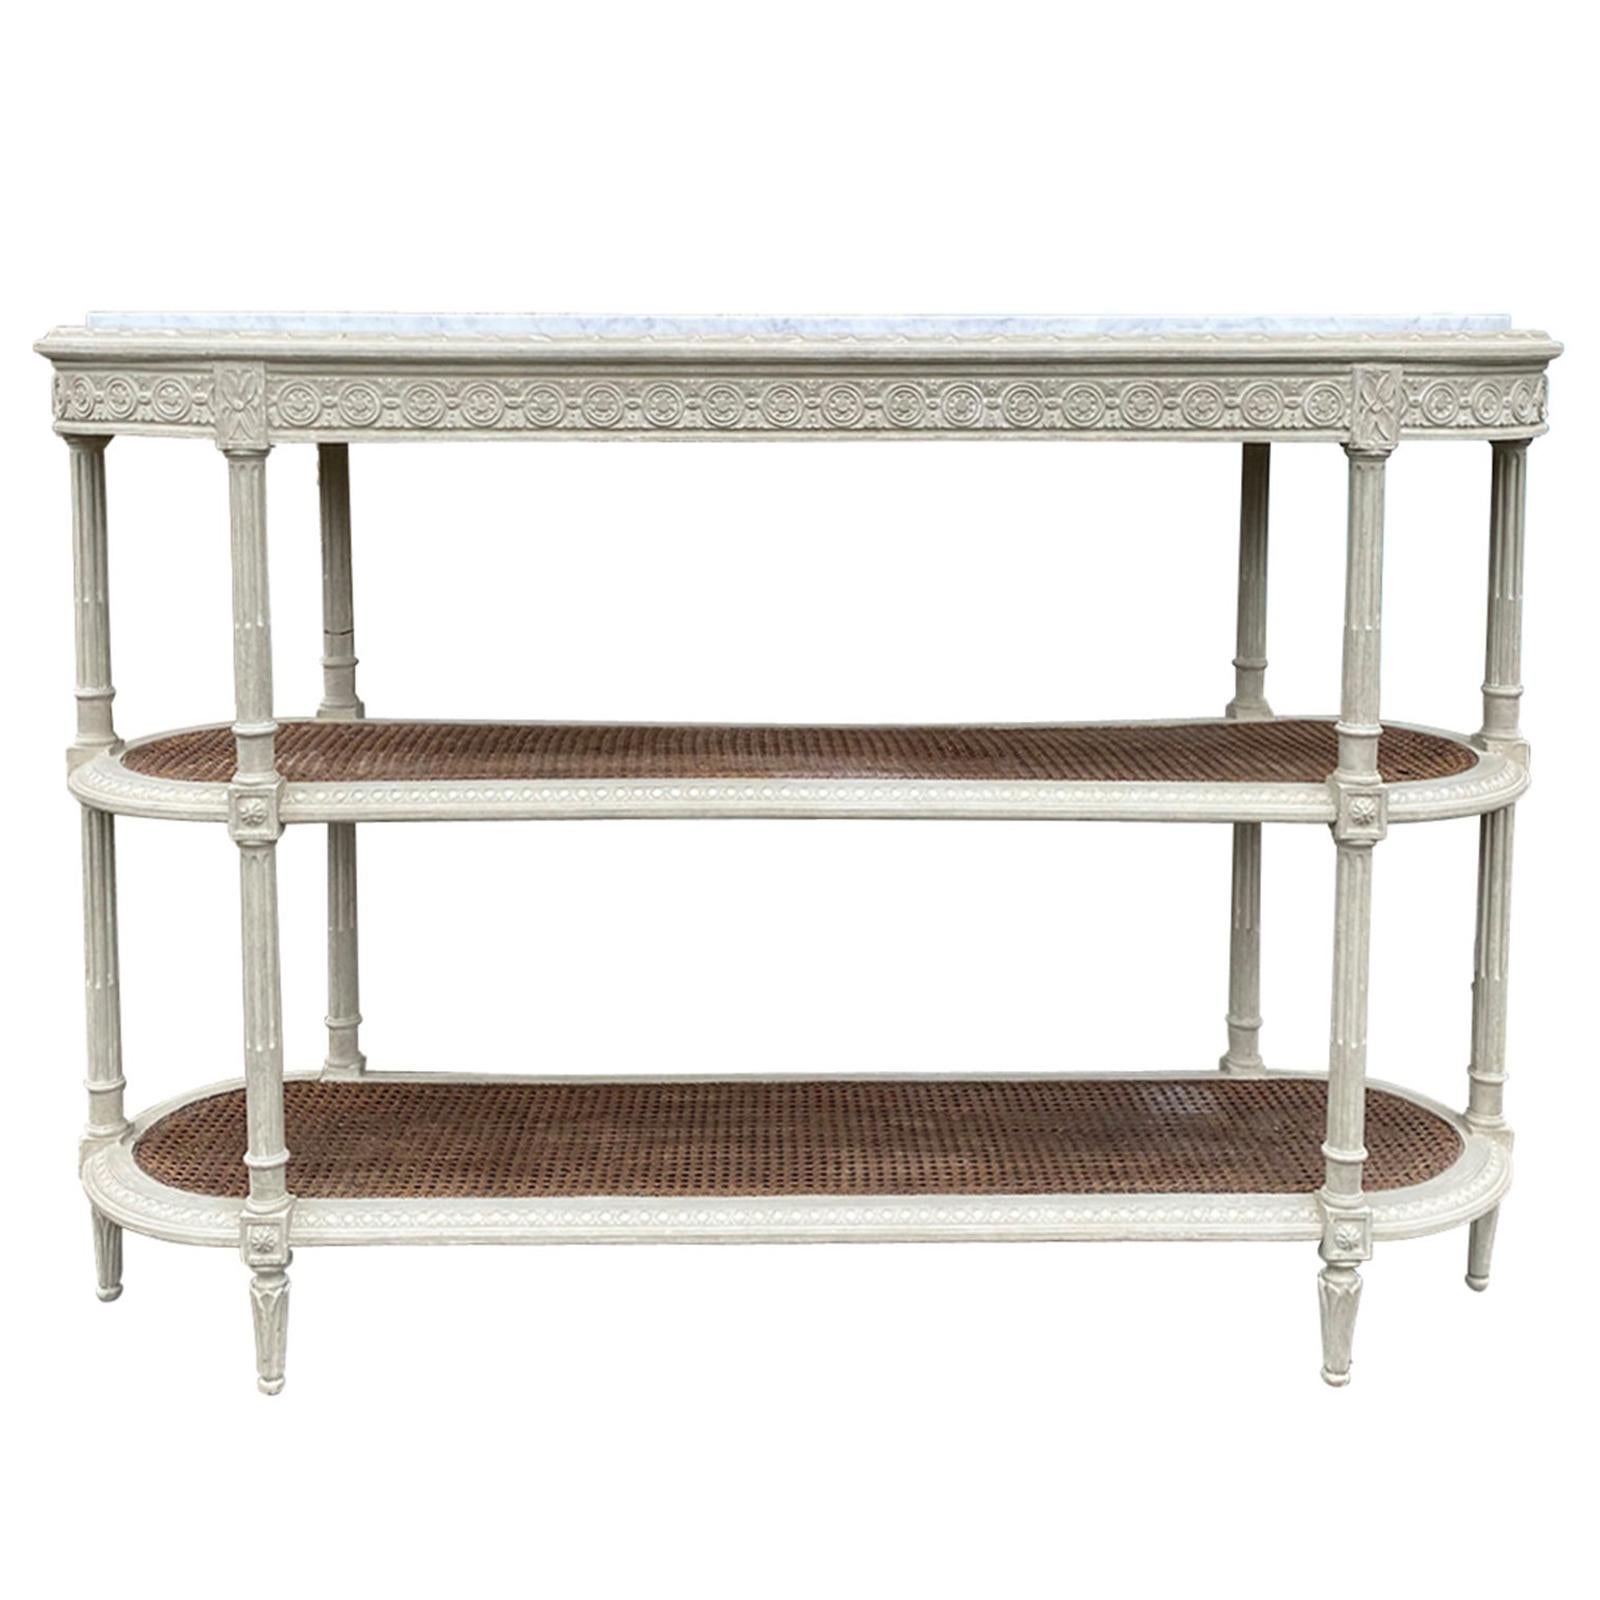 Circa 1900 Louis XVI Style Marble Top 3 Tiered Console, White Carrara Marble Top